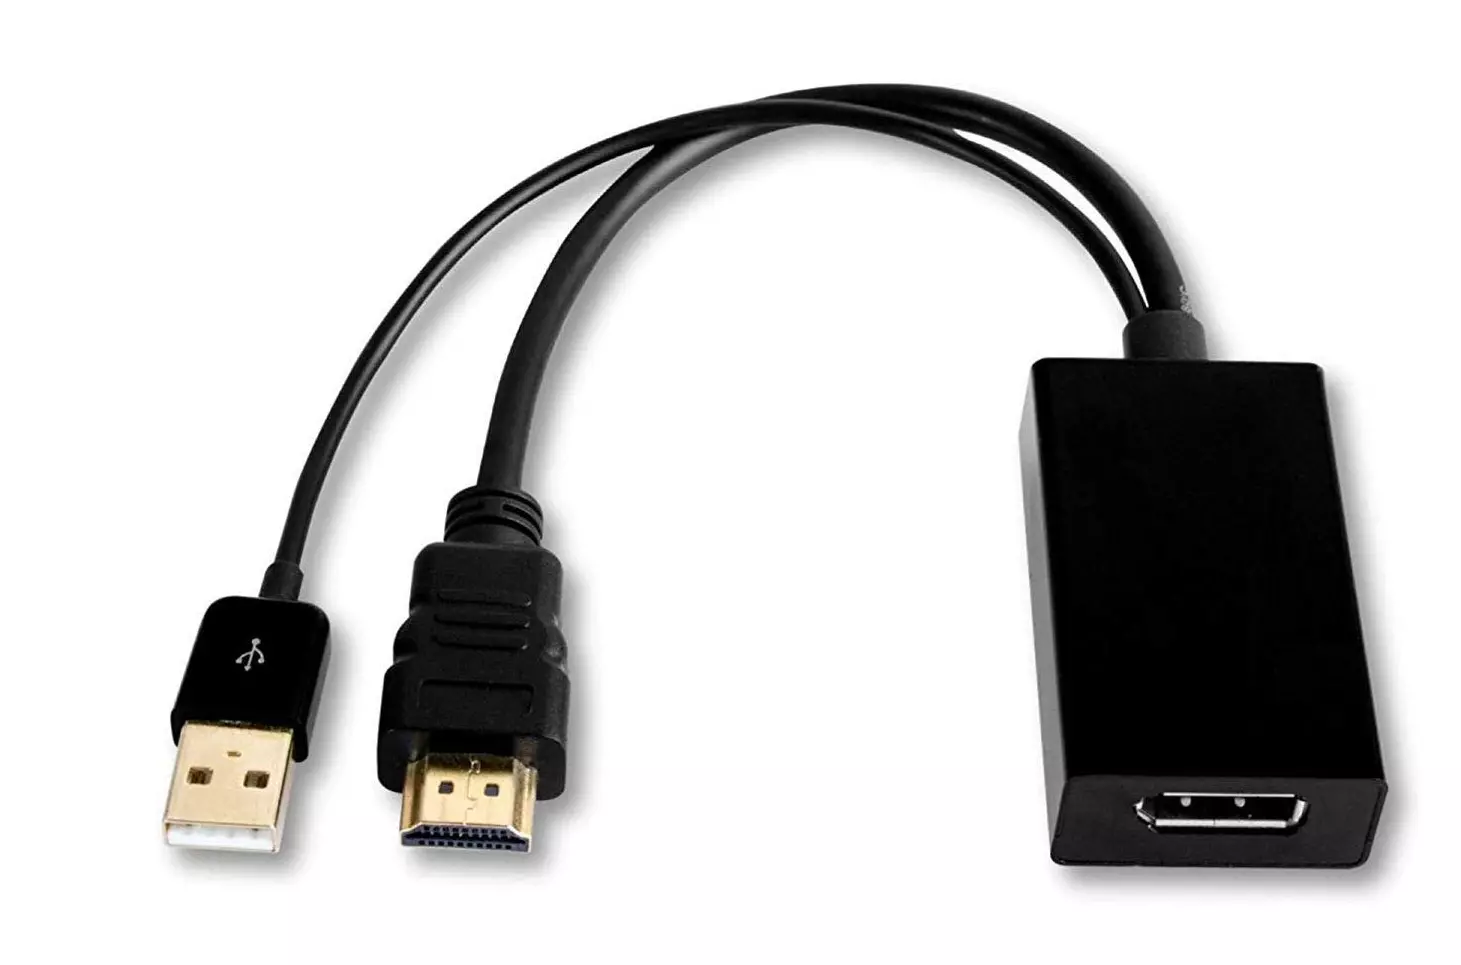 What is an HDMI to DisplayPort adapter